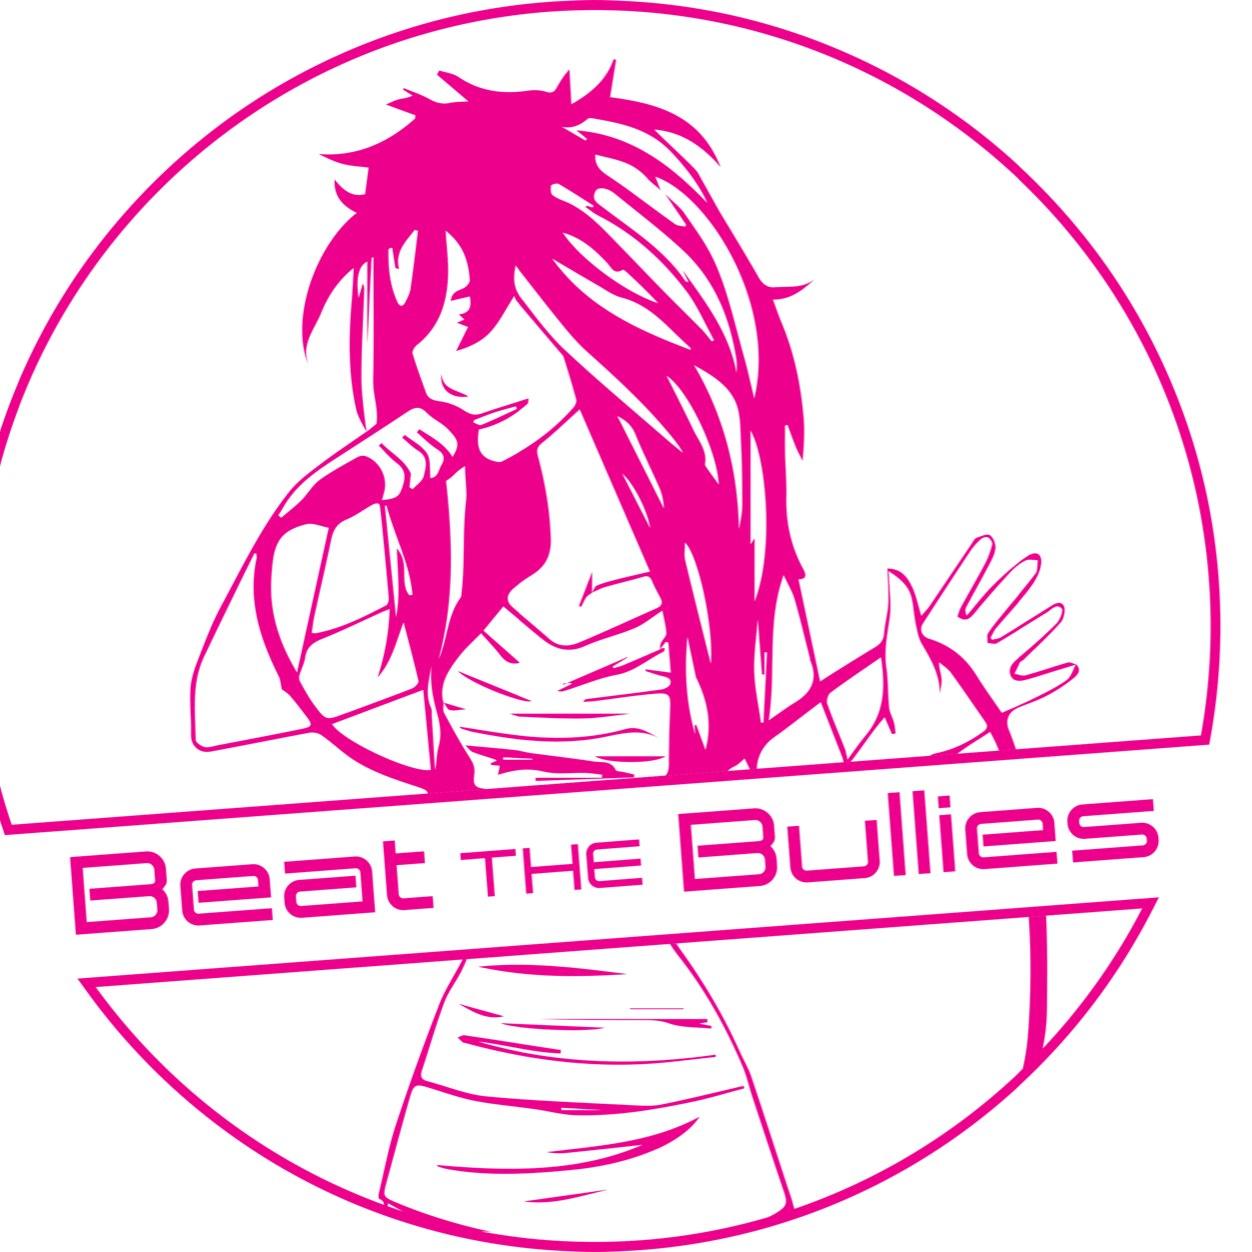 BEAT the bullies is a project set up to help children turn worries into something postitive by using music! https://t.co/cERtj8dsKe Info@beatthebullies.org